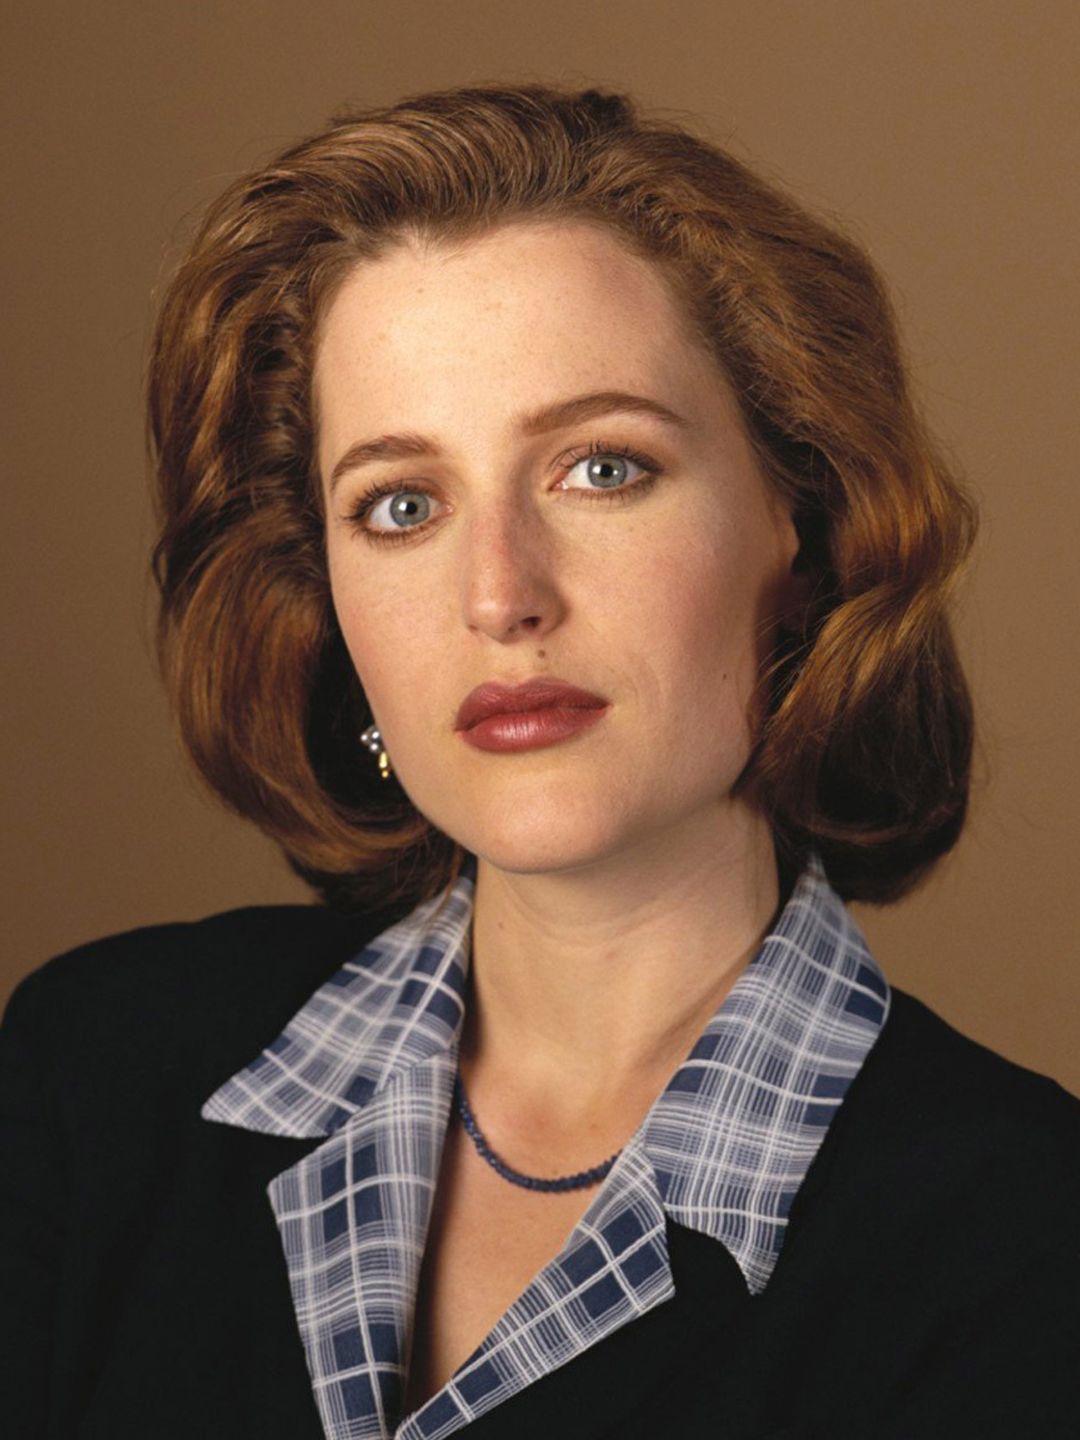 Gillian Anderson how did she became famous